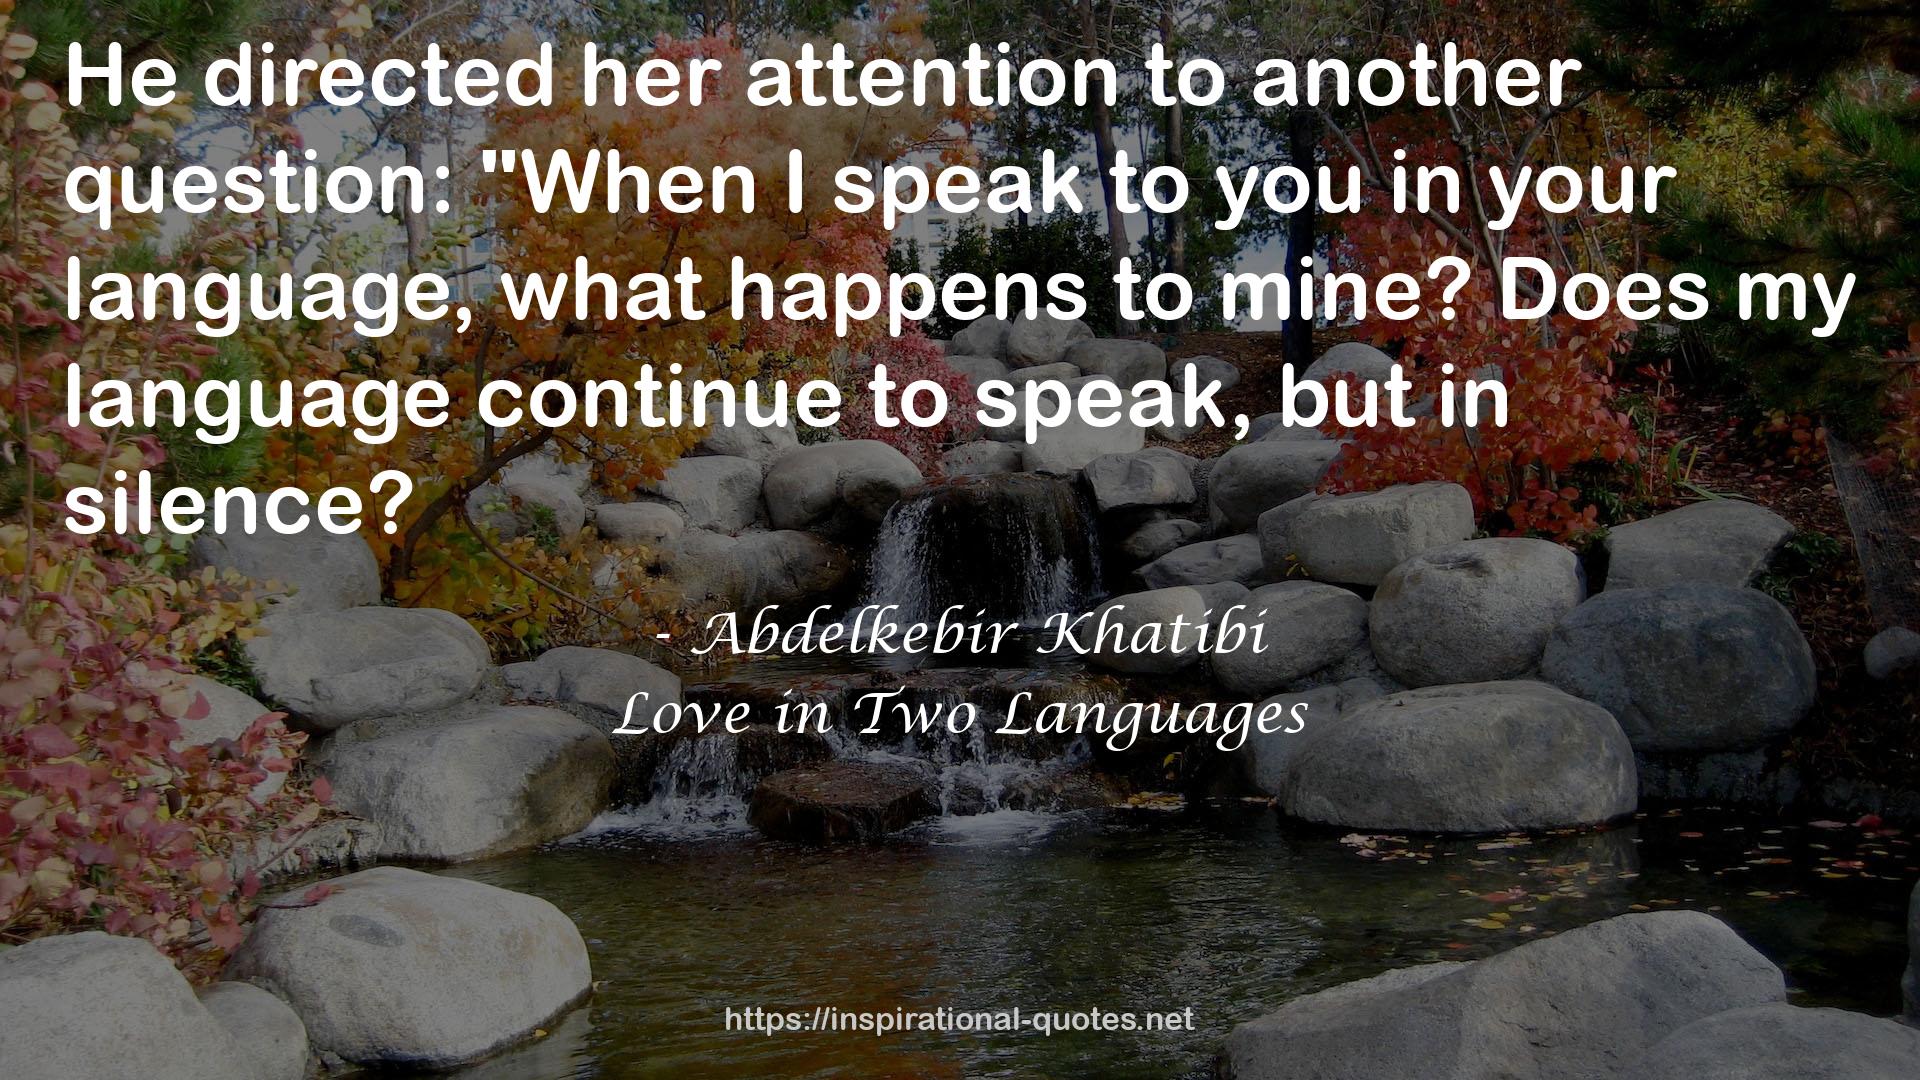 Love in Two Languages QUOTES